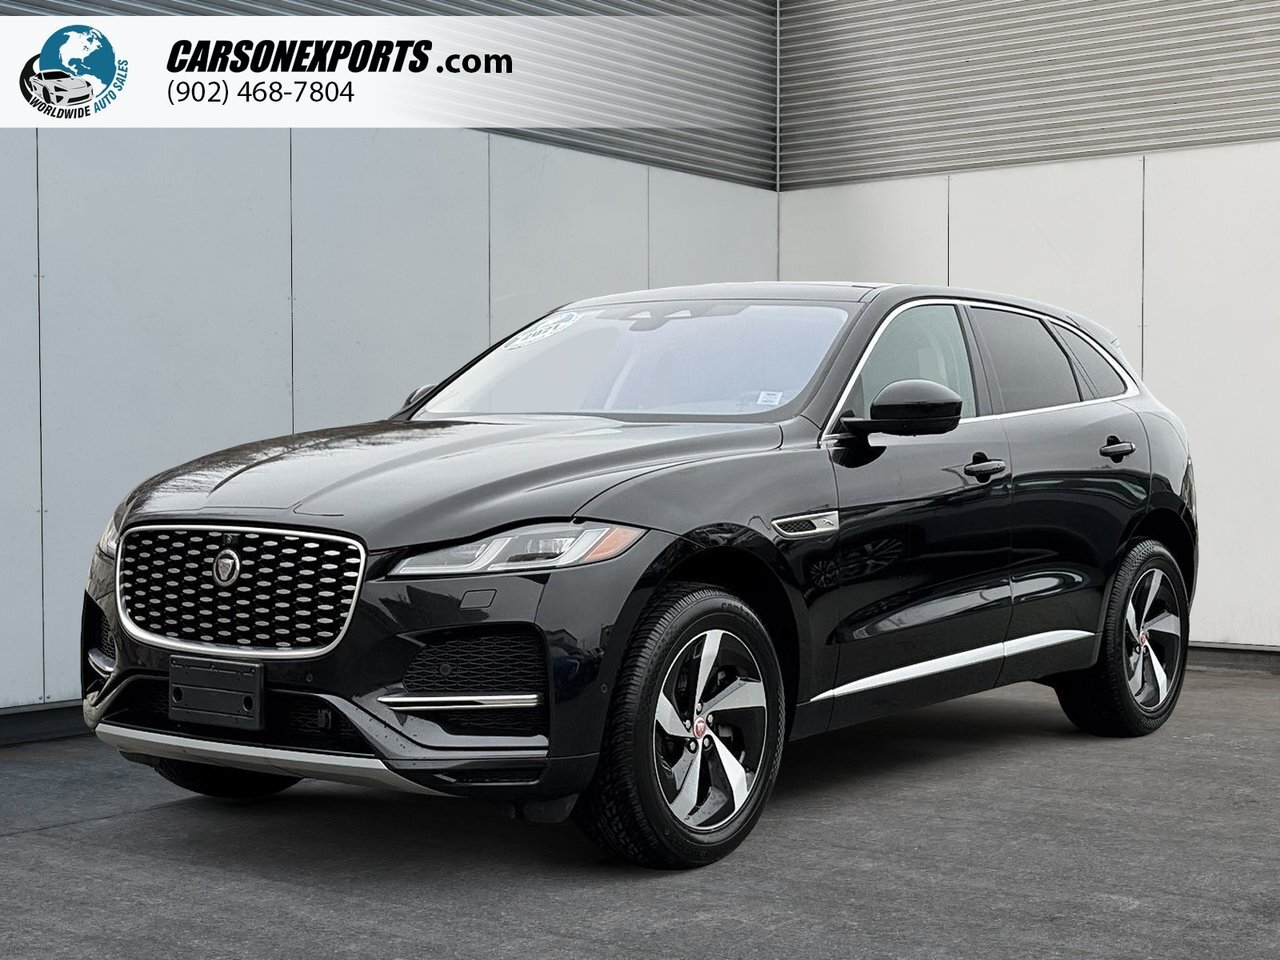 2021 Jaguar F-Pace P250 S The best place to buy a used car. Period.